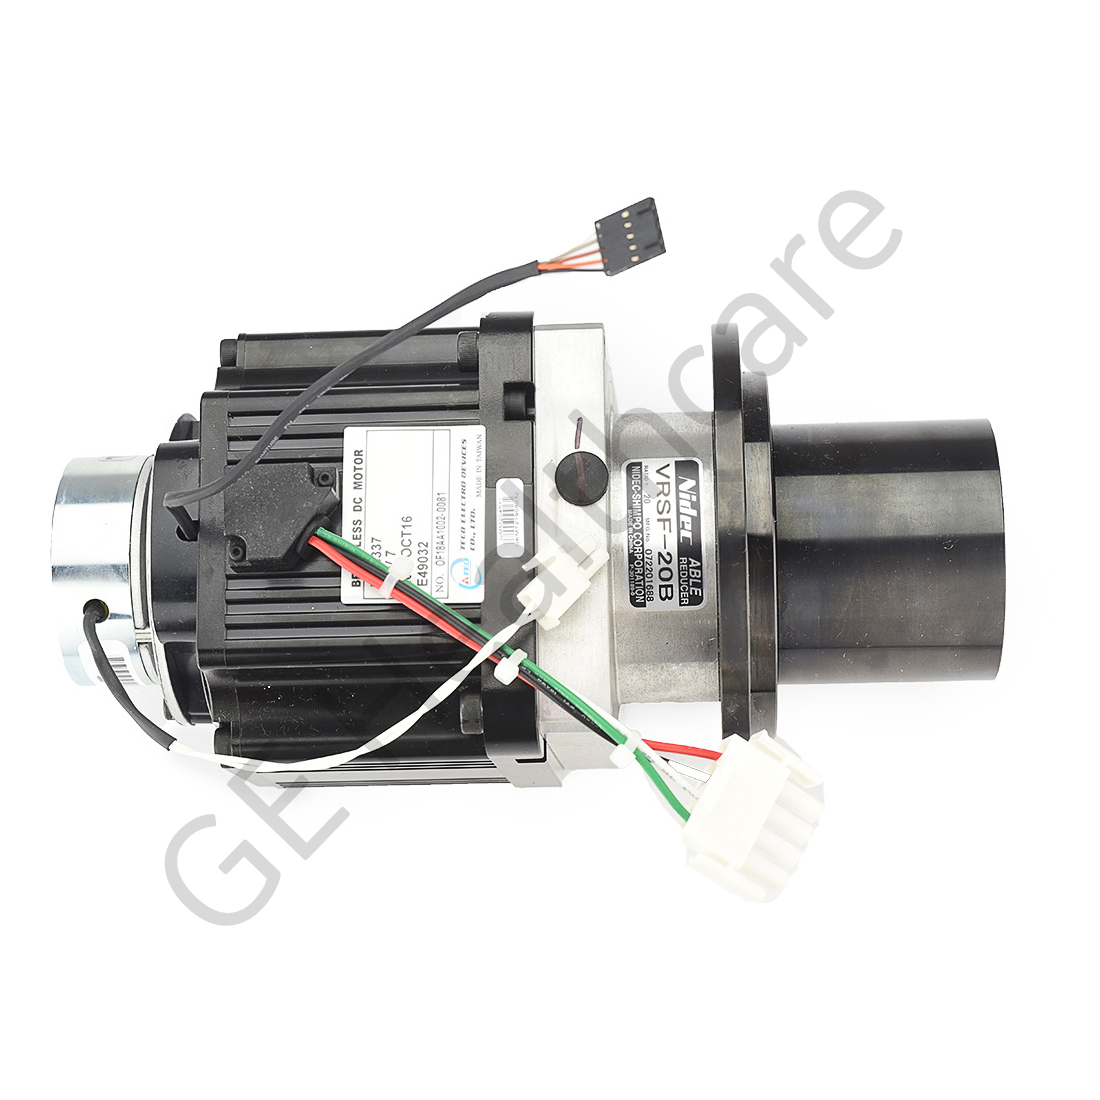 Motor Reducer Assembly with Brake